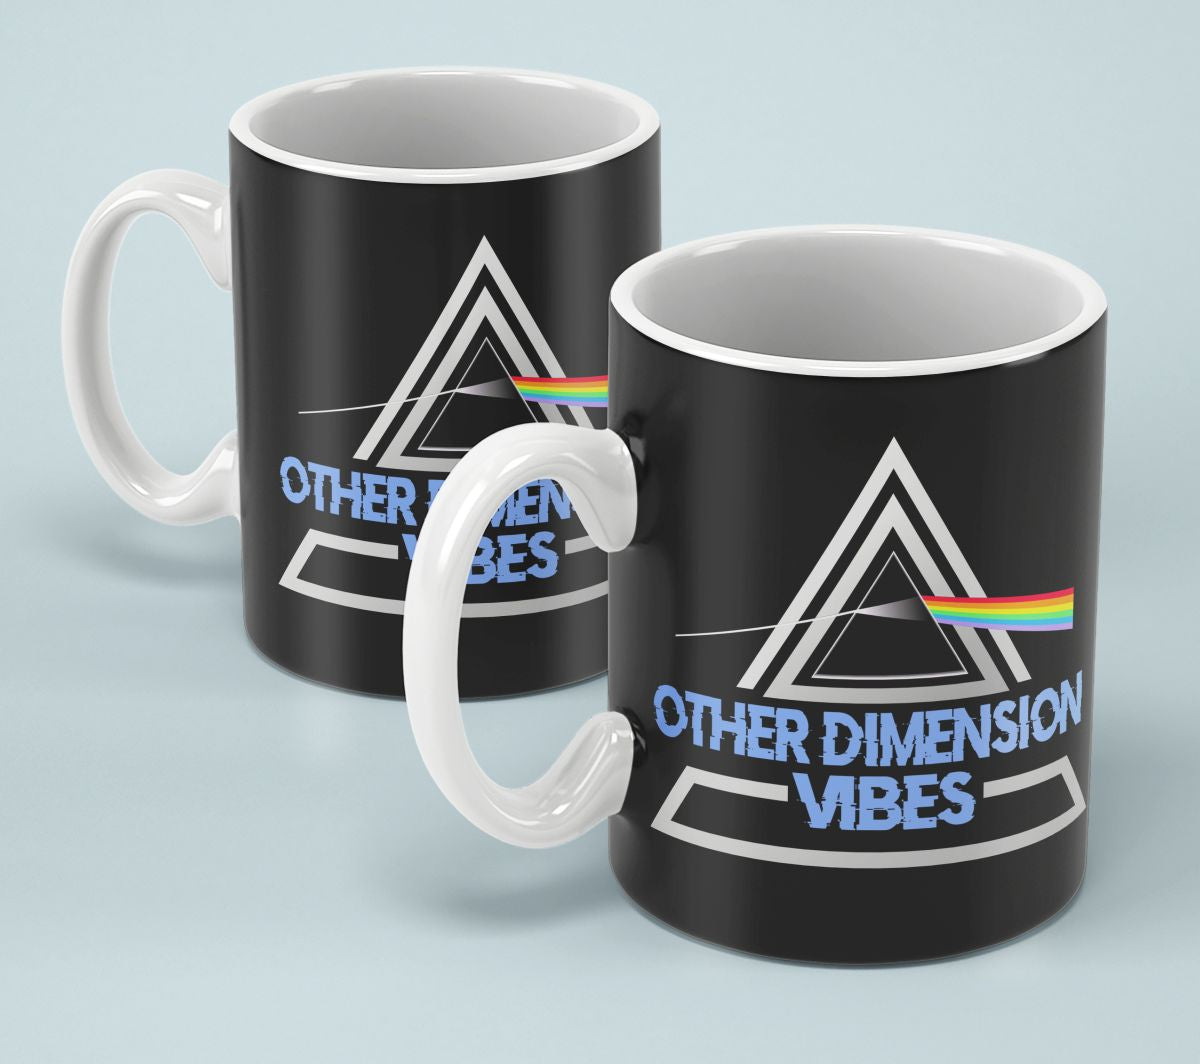 Other Dimension Vibes Ceramic 15 oz Mug - The Space Store